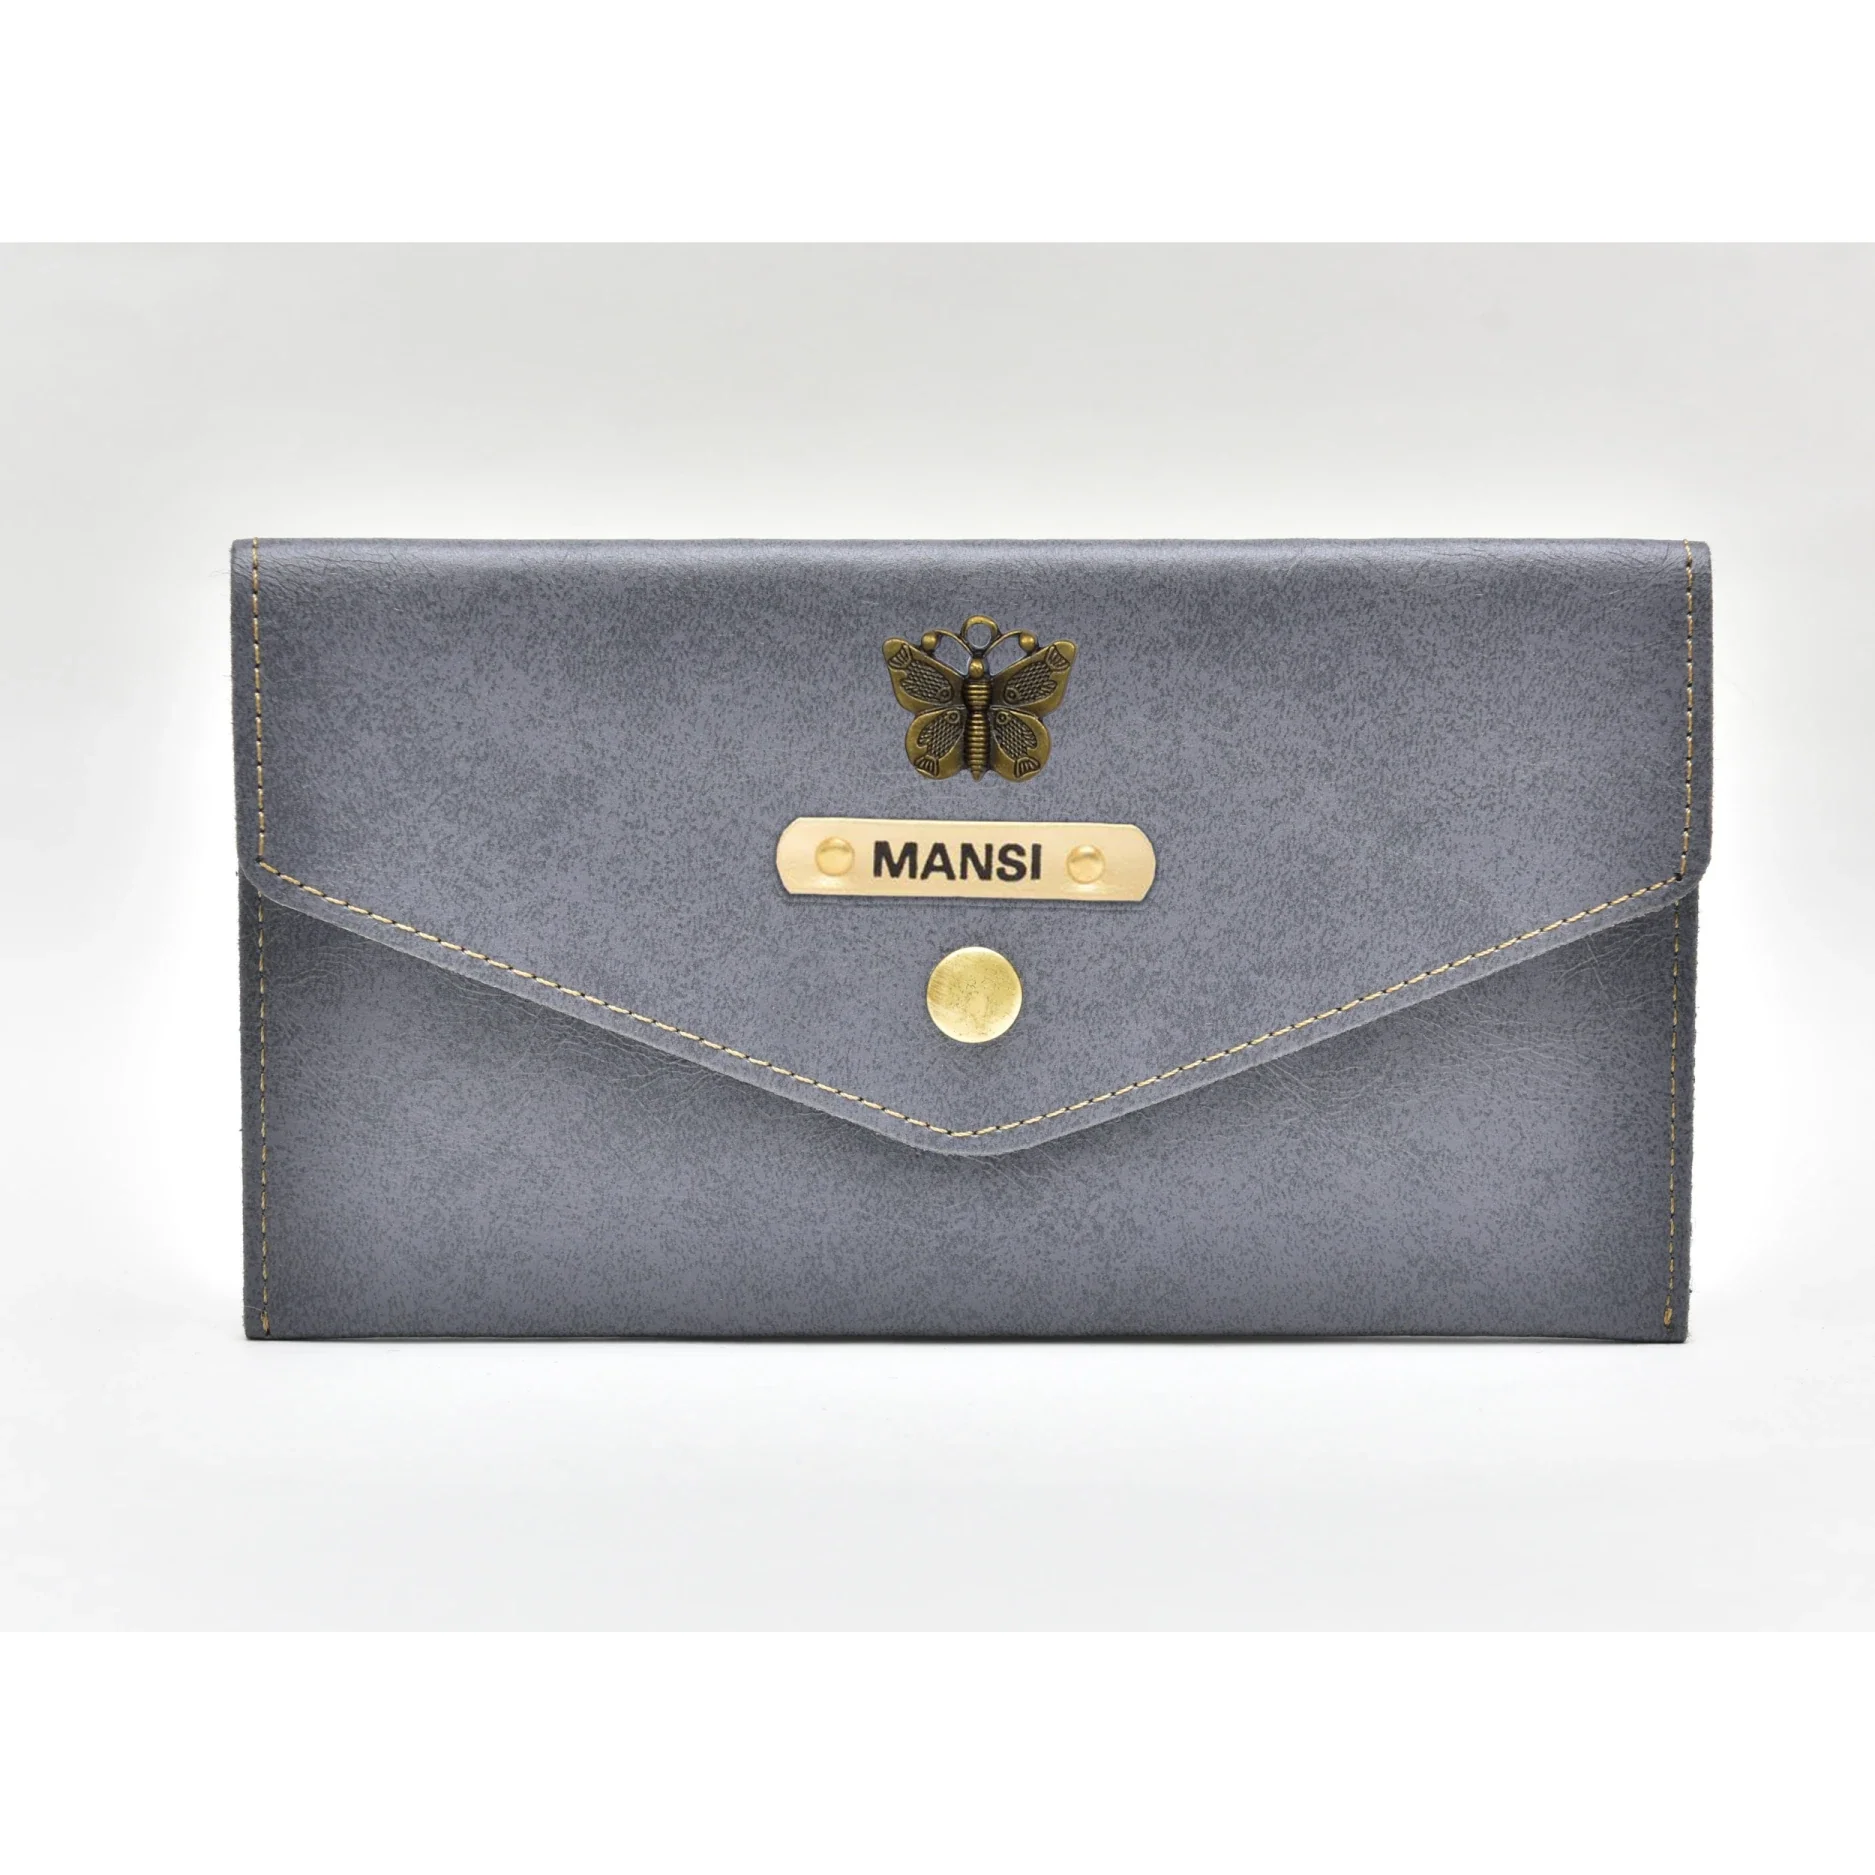 Keep your cards, cash, and other essentials organized and at hand with our sleek and stylish minimal clutches.